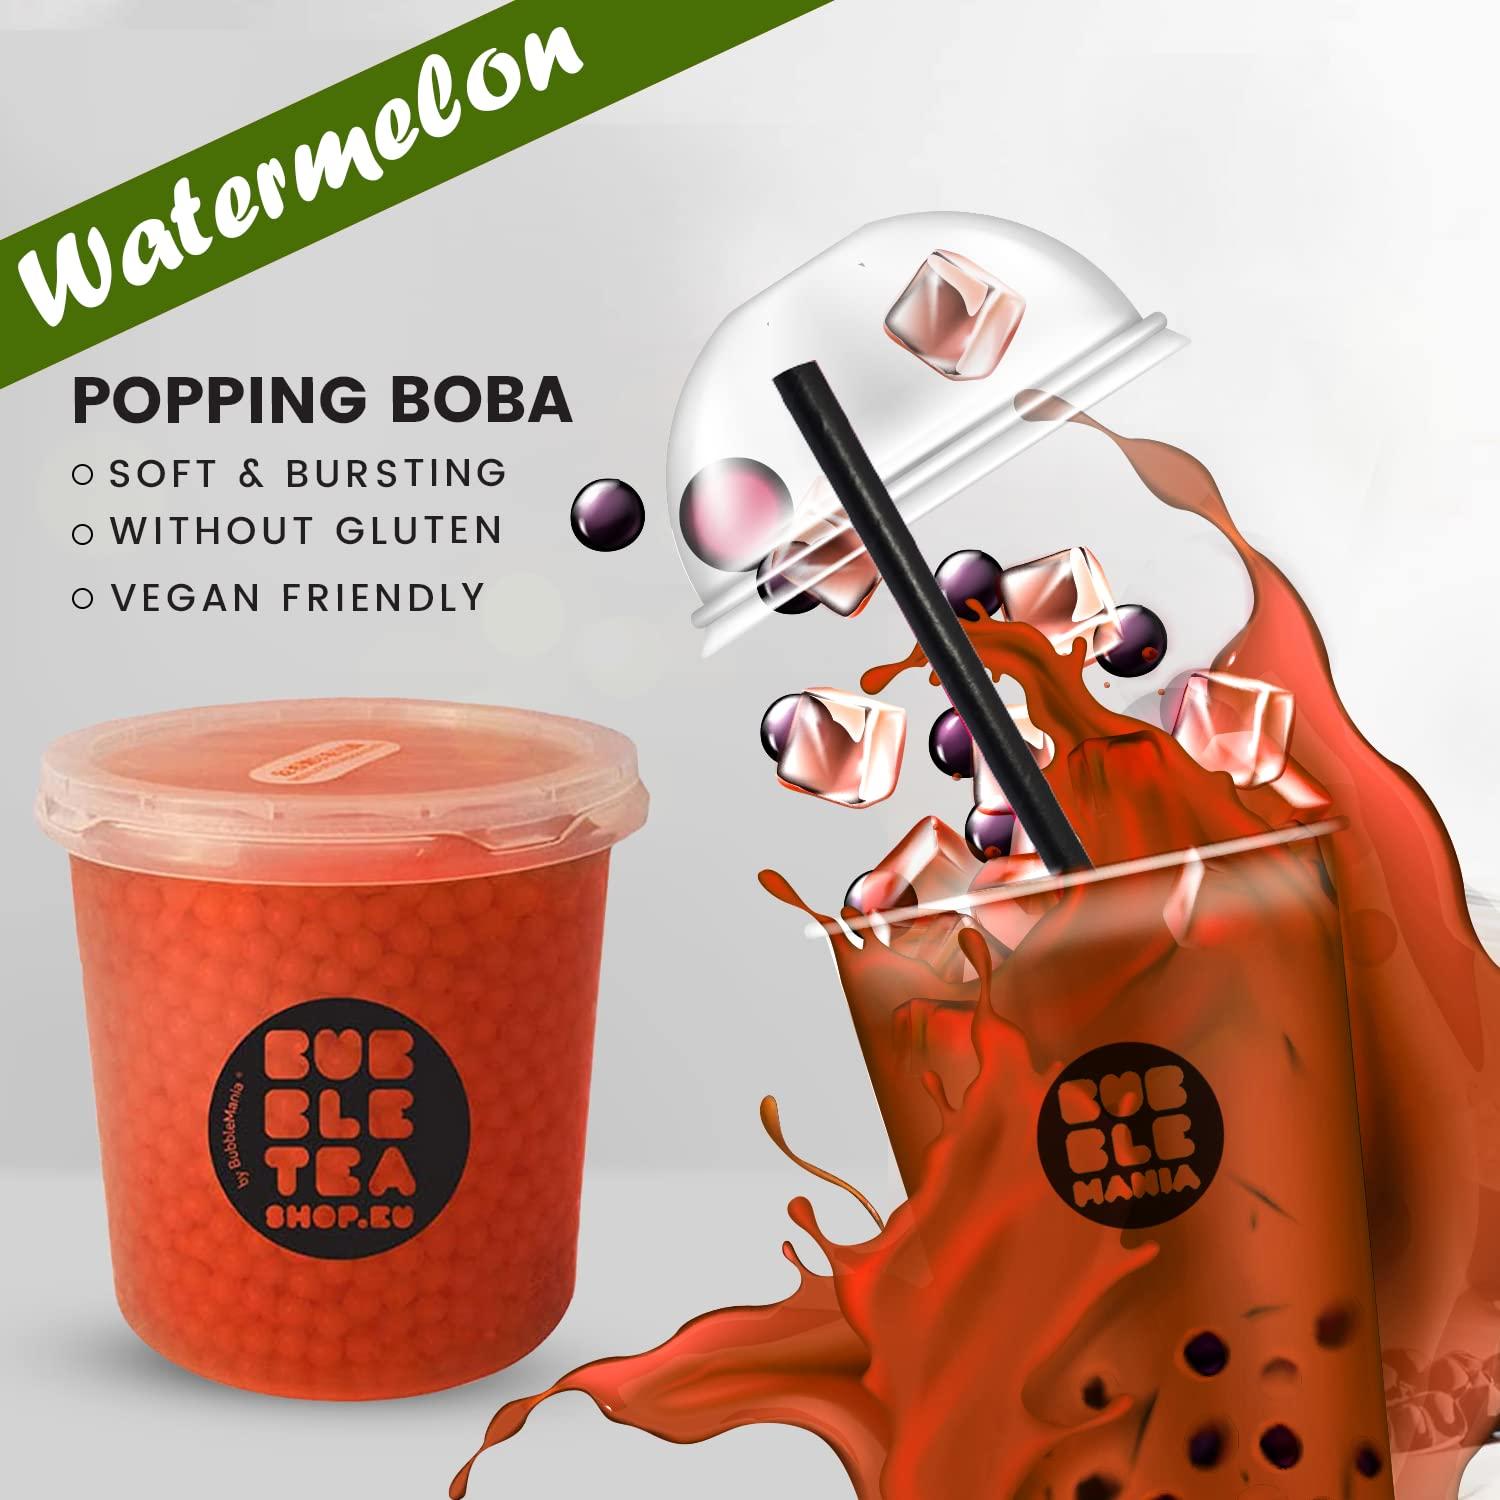 Strawberry bursting boba tea set is on shelves now for the holiday season!  This refreshing drink kit is created by Fun Food Gifts. Gift…